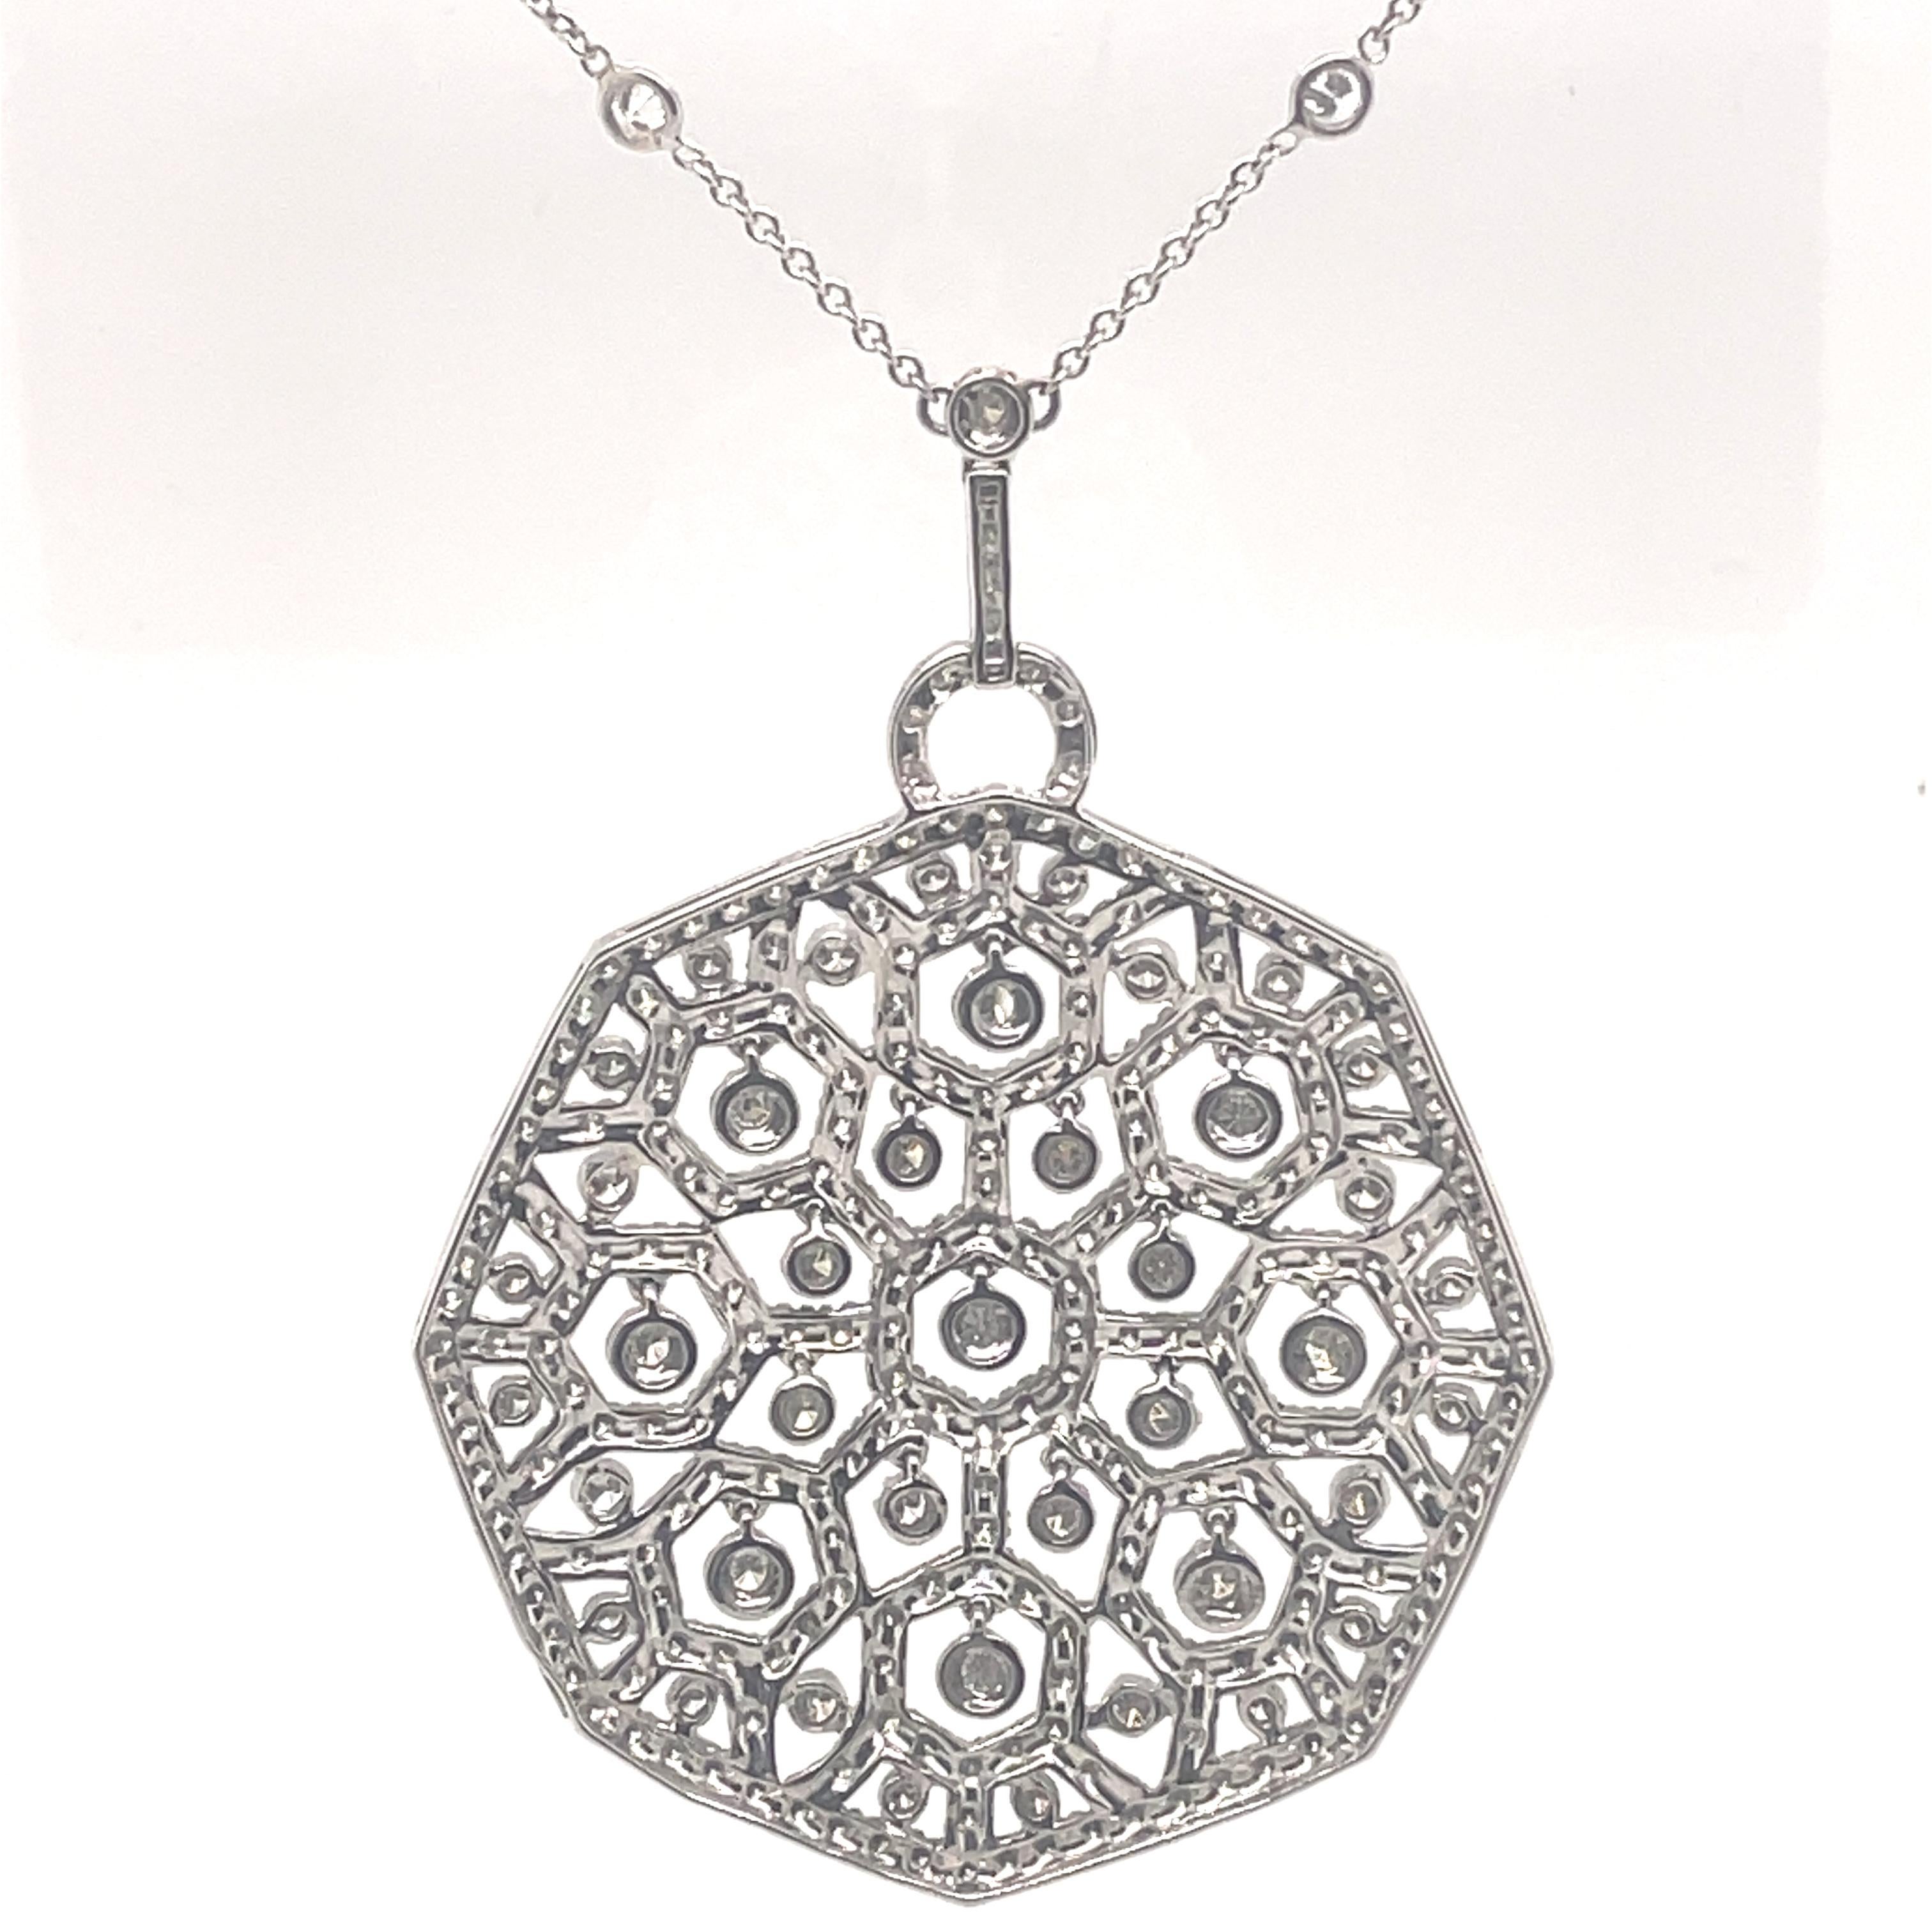 7.59ct Diamond Octagon Pendant Necklace 18 Karat White Gold In New Condition For Sale In BEVERLY HILLS, CA